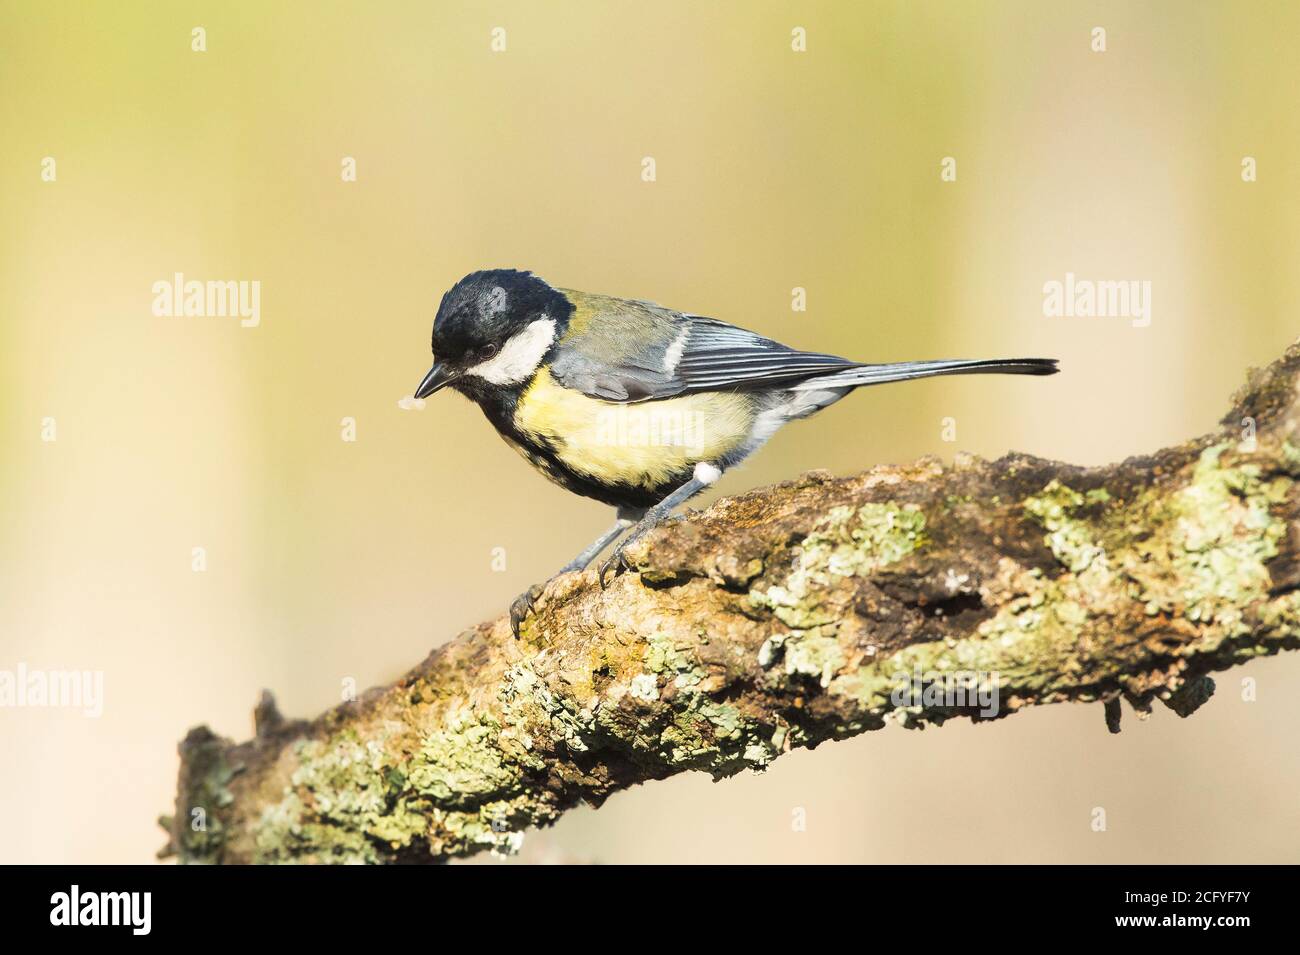 https://c8.alamy.com/comp/2CFYF7Y/the-great-tit-parus-major-is-a-passerine-bird-in-the-tit-family-paridae-it-is-a-widespread-and-common-species-throughout-europe-middle-east-etc-2CFYF7Y.jpg